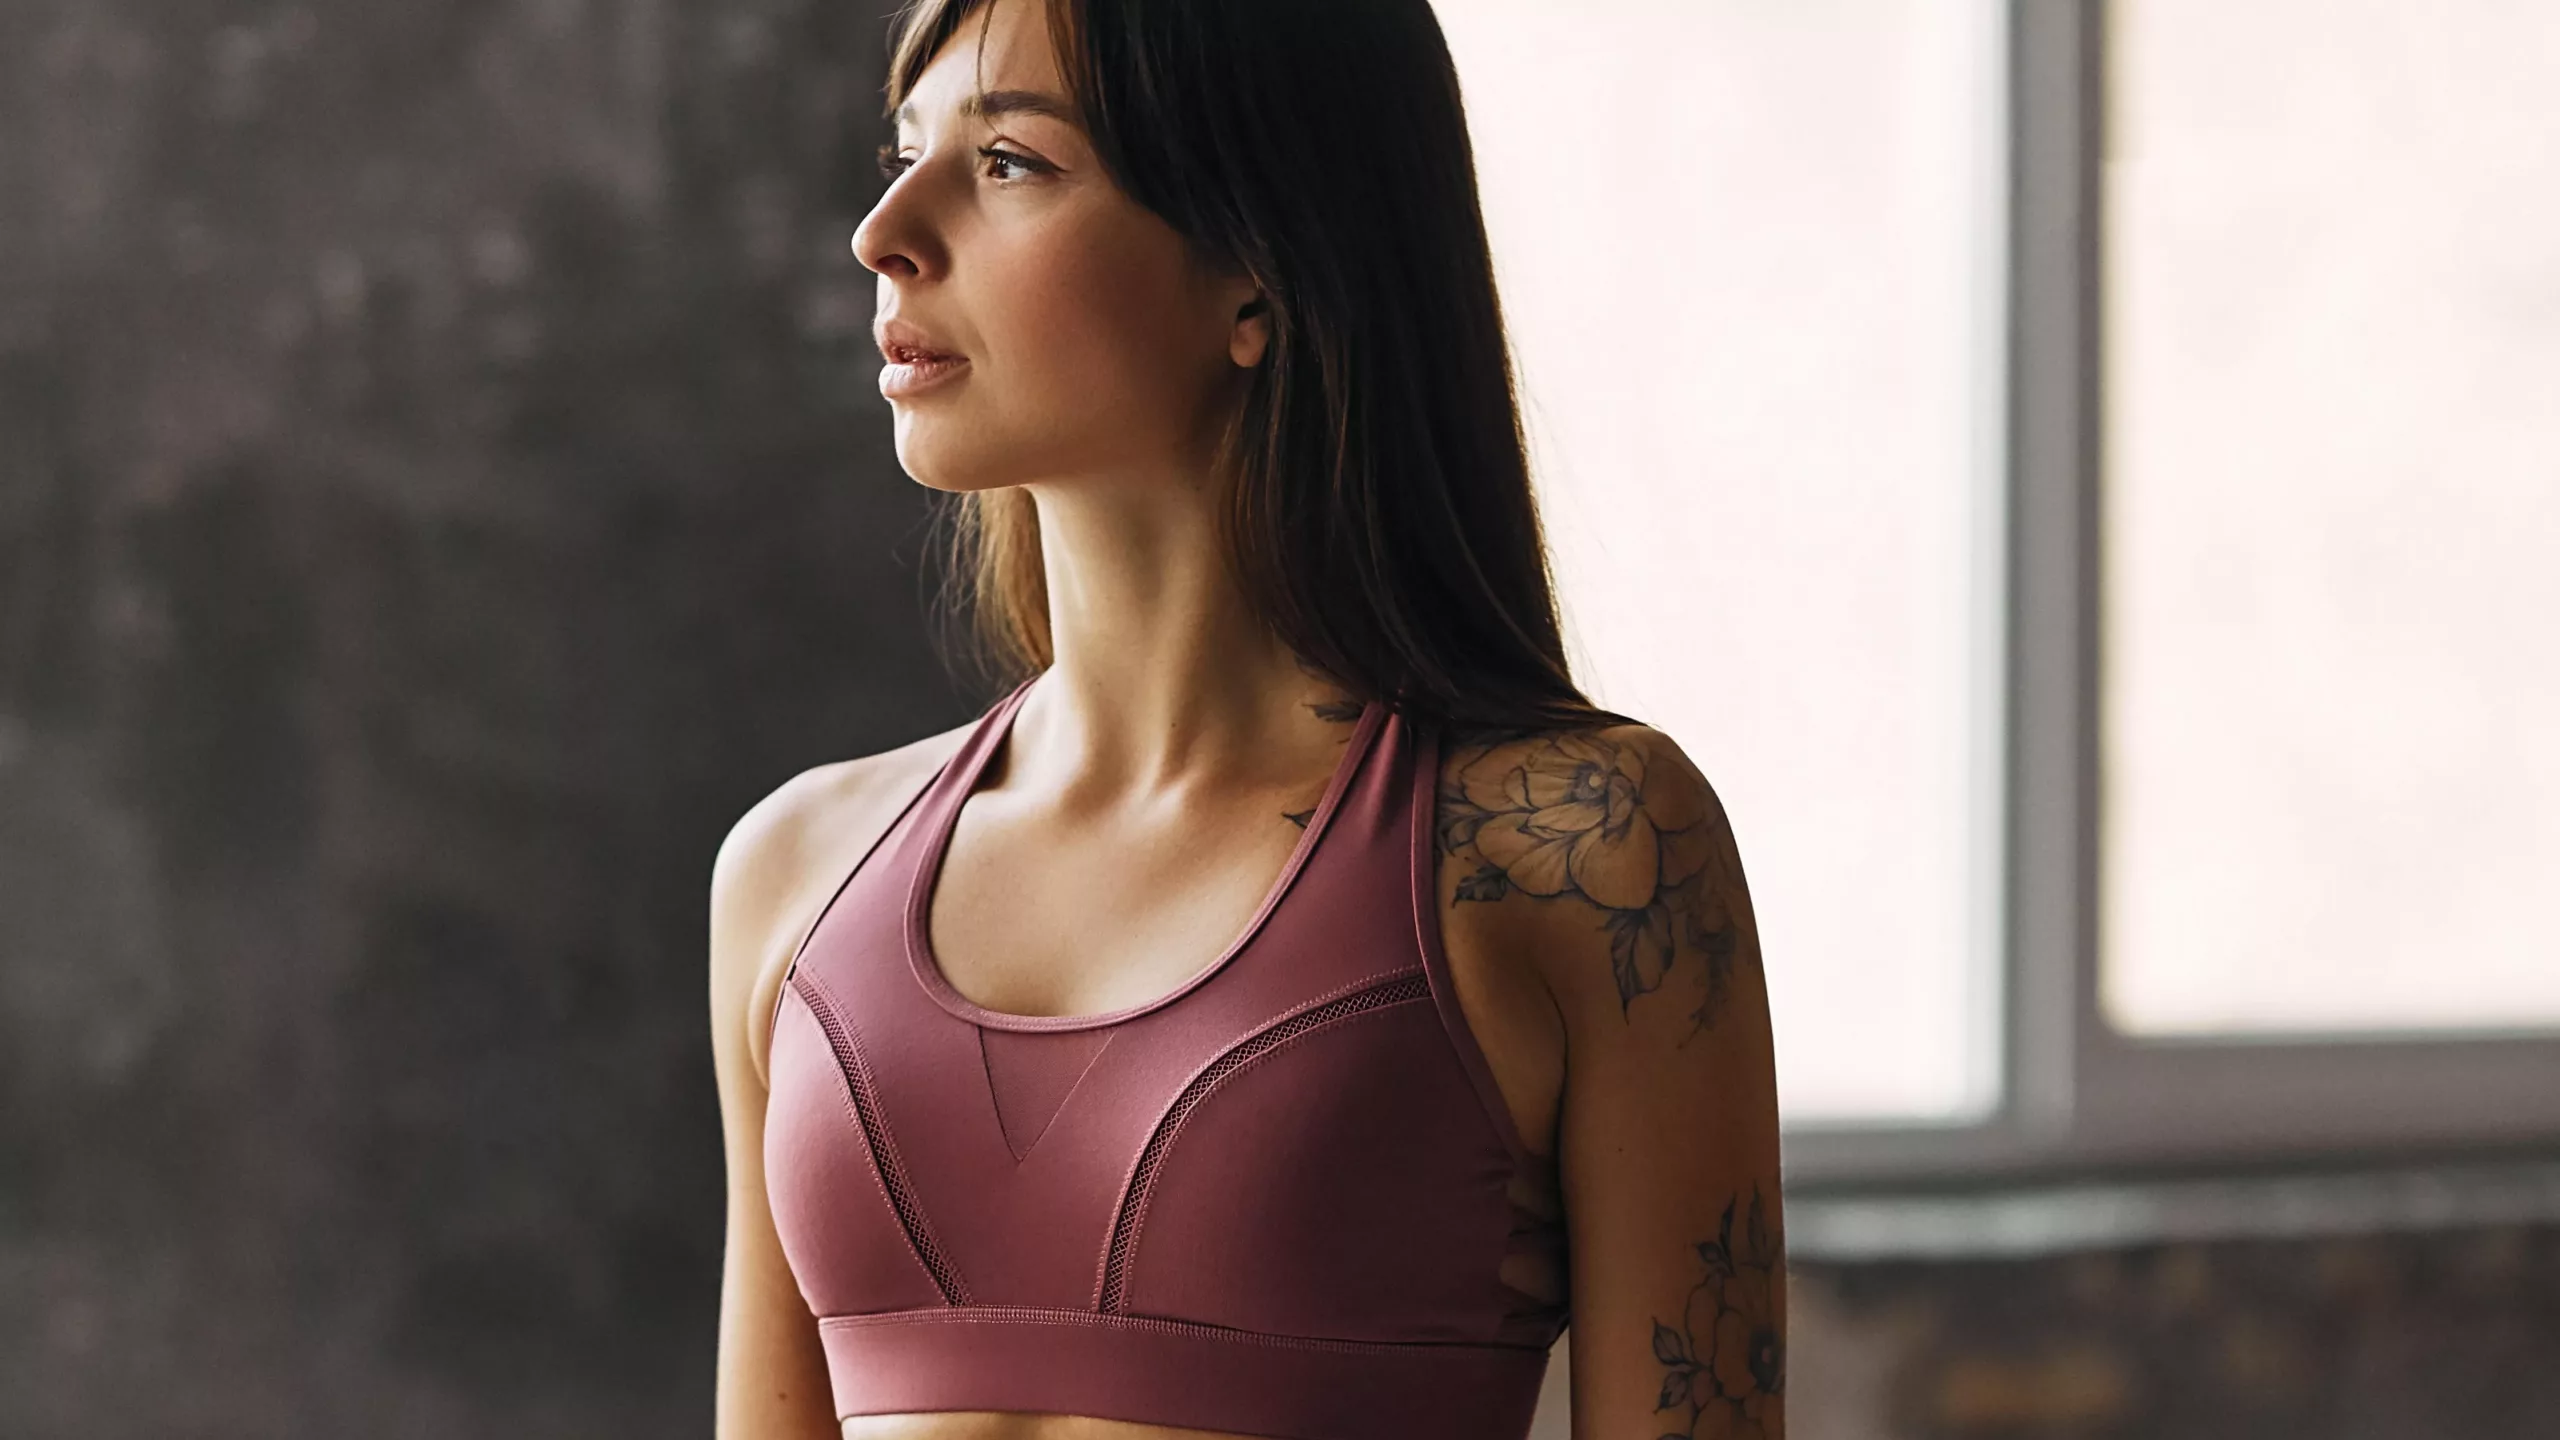 Vibrant Body Company assesses risks of BPA in sport bras, Our Partners